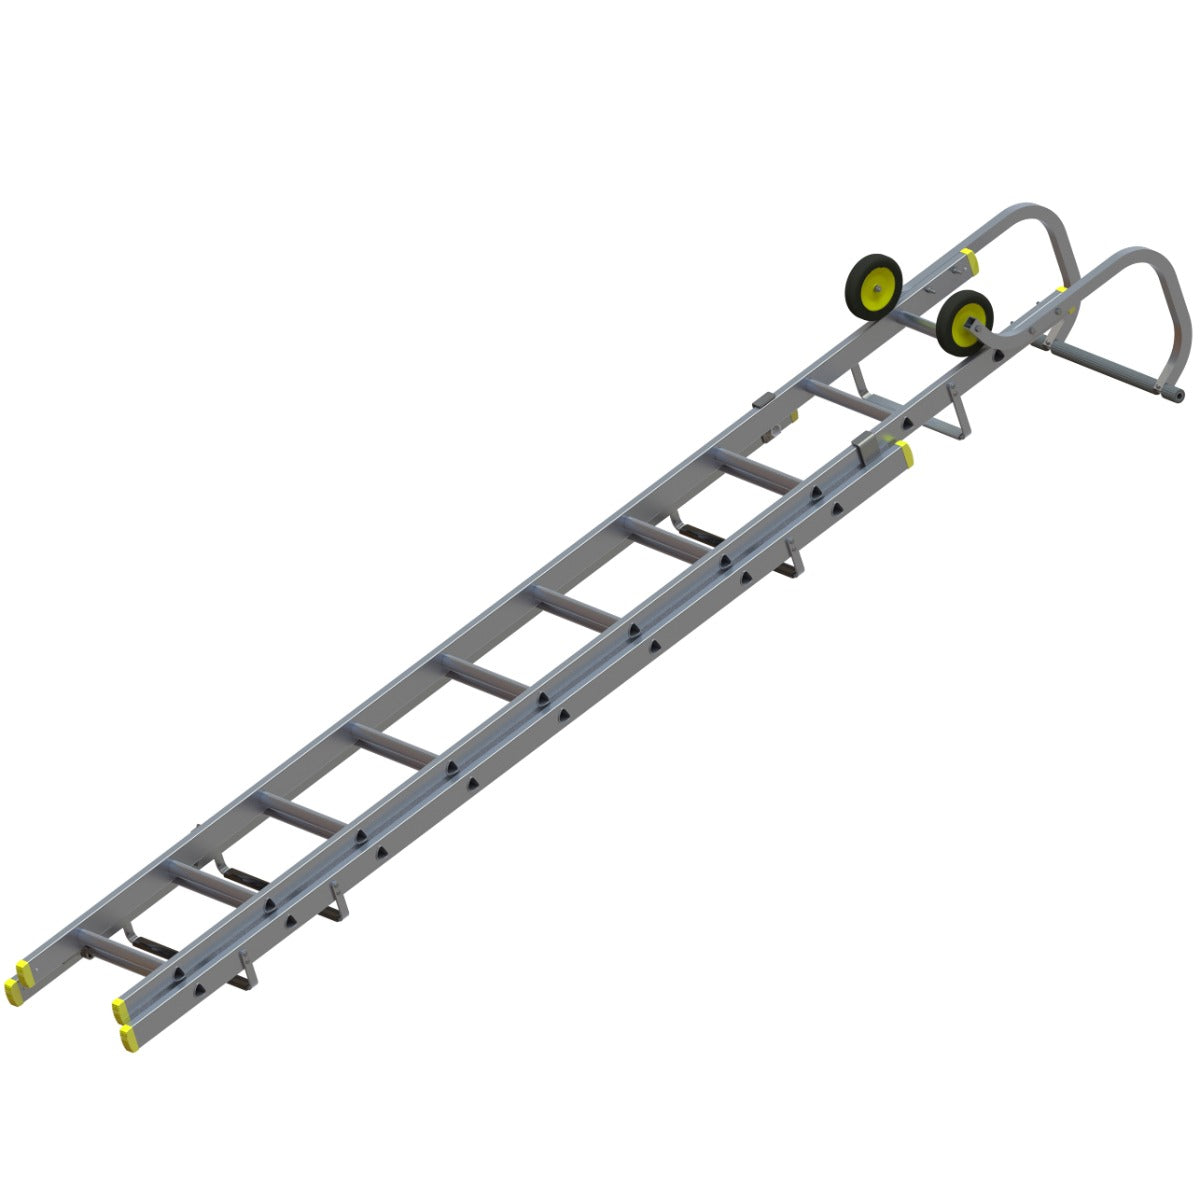 Youngman 2 Section Roof Ladder - closed